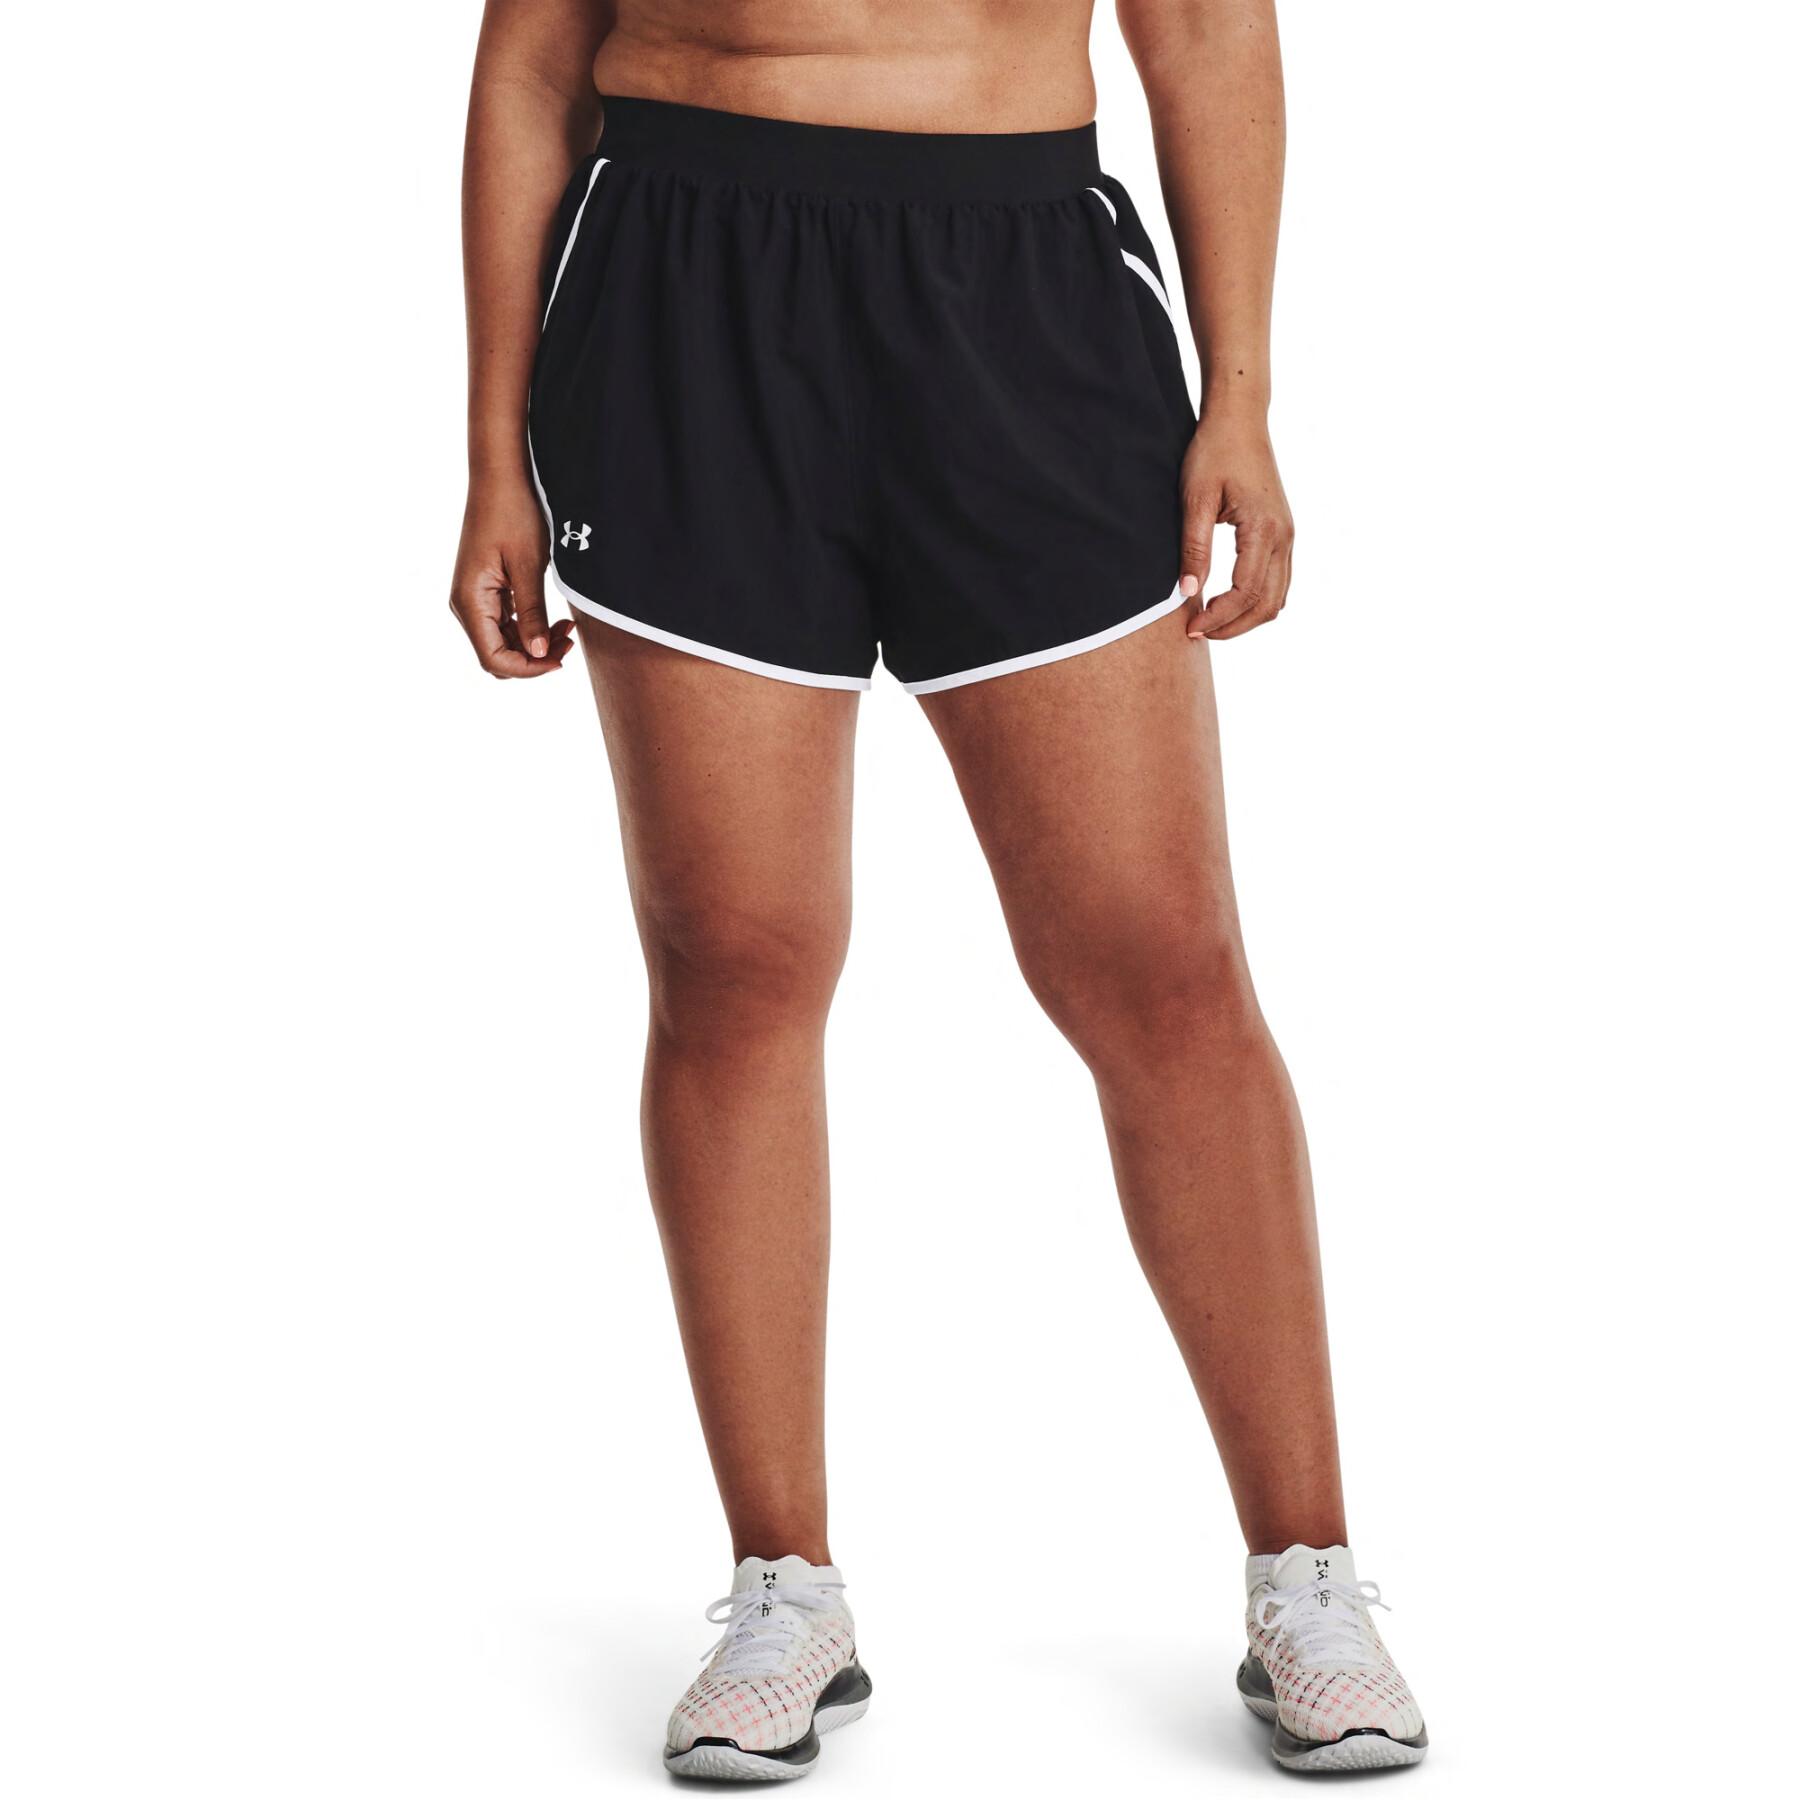 Damesshort Under Armour Fly By 2.0 GT